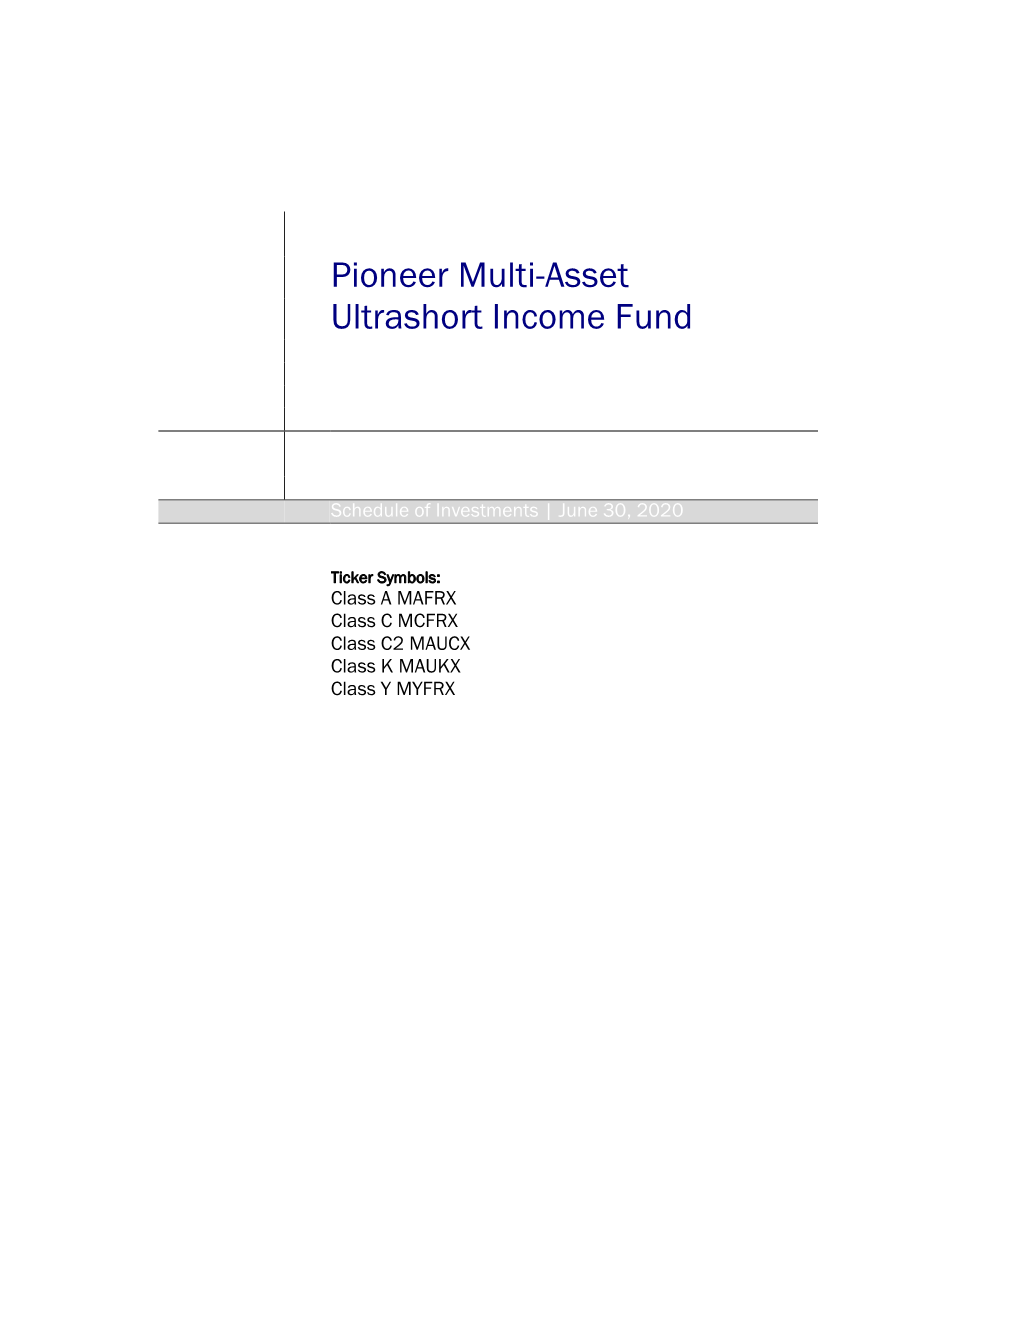 Pioneer Multi-Asset Ultrashort Income Fund | 6/30/20 Schedule of Investments | 6/30/20 (Unaudited) (Continued)